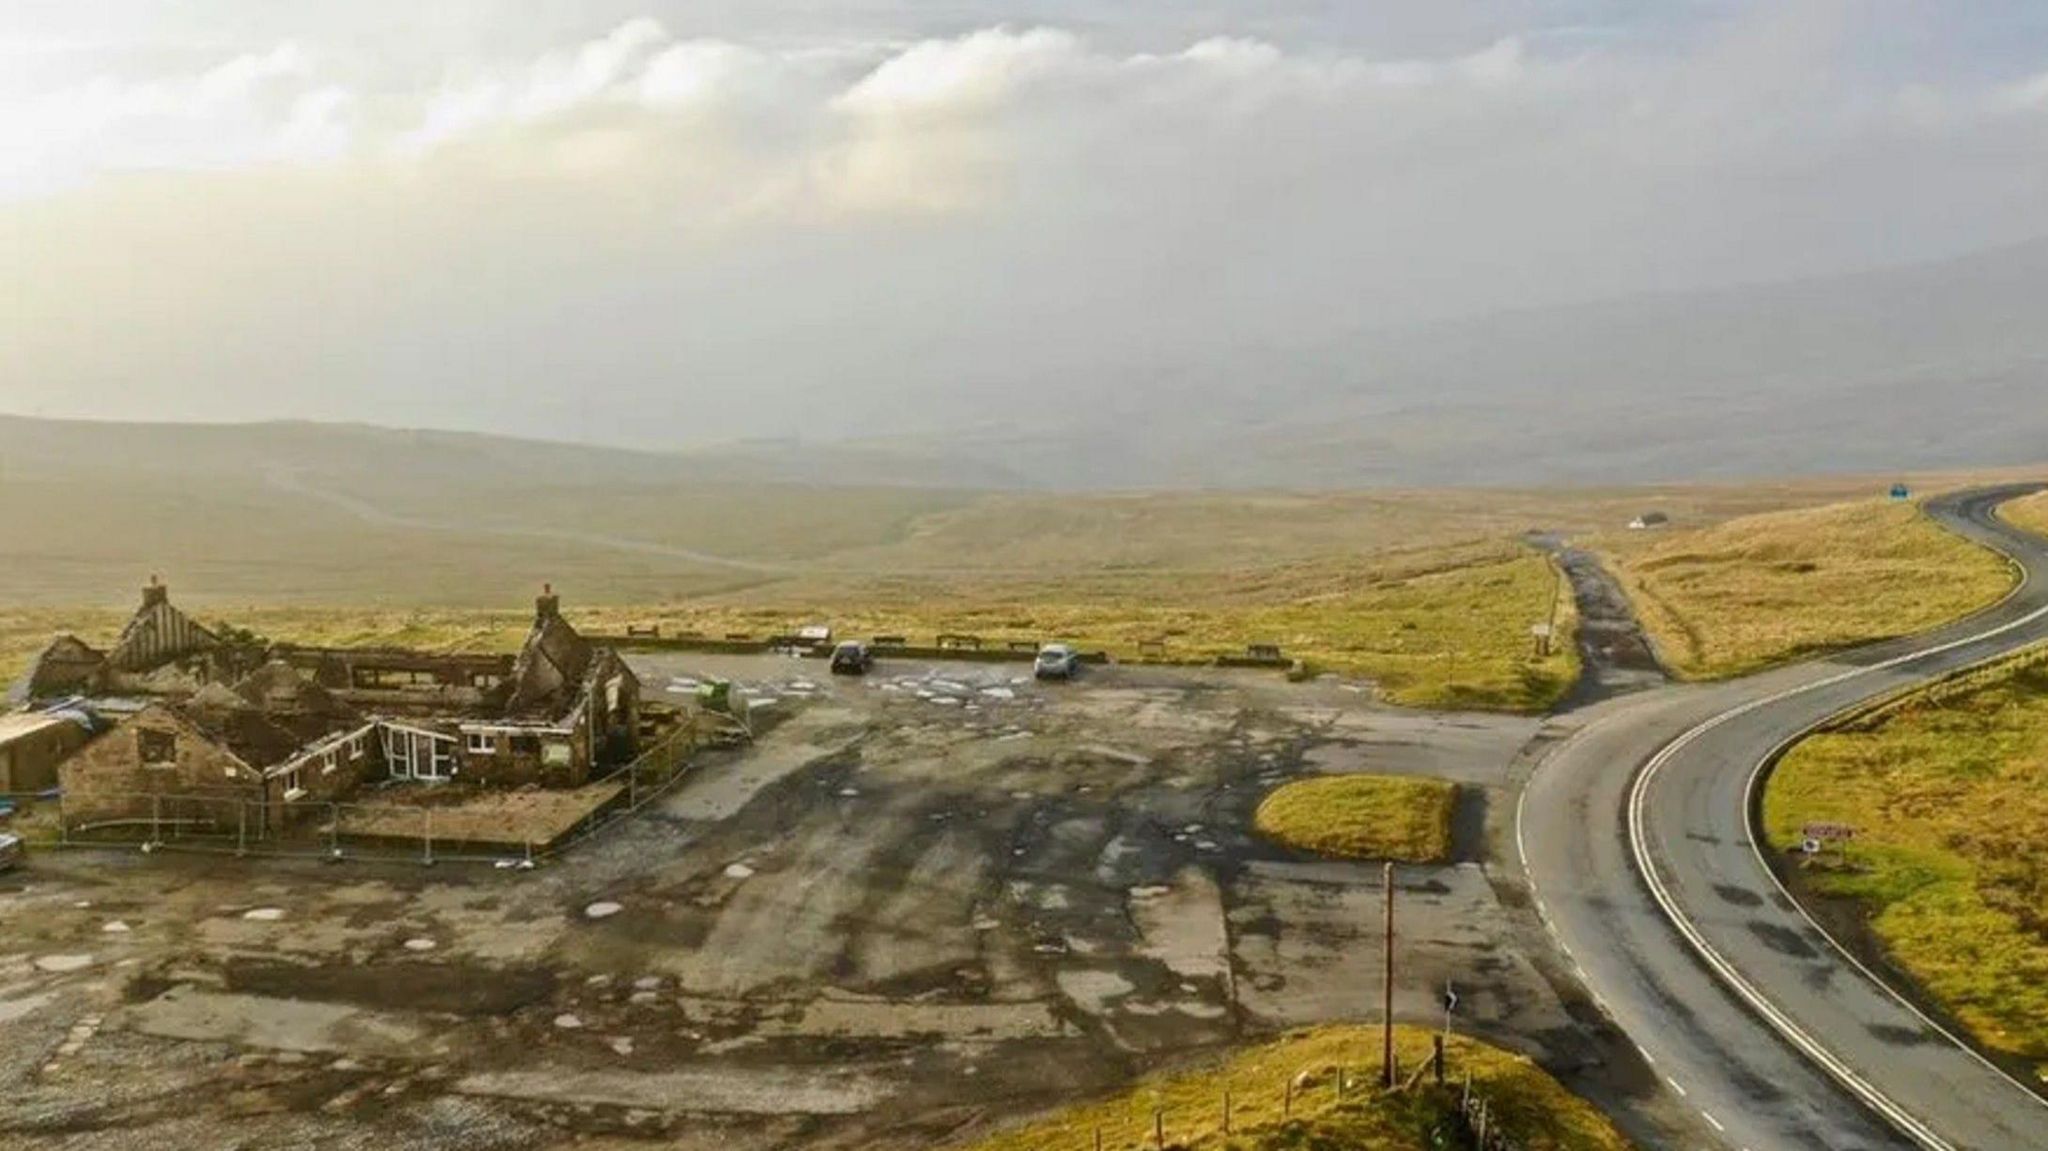 A bird's eye view of the former Hartside Cafe which was destroyed in a fire